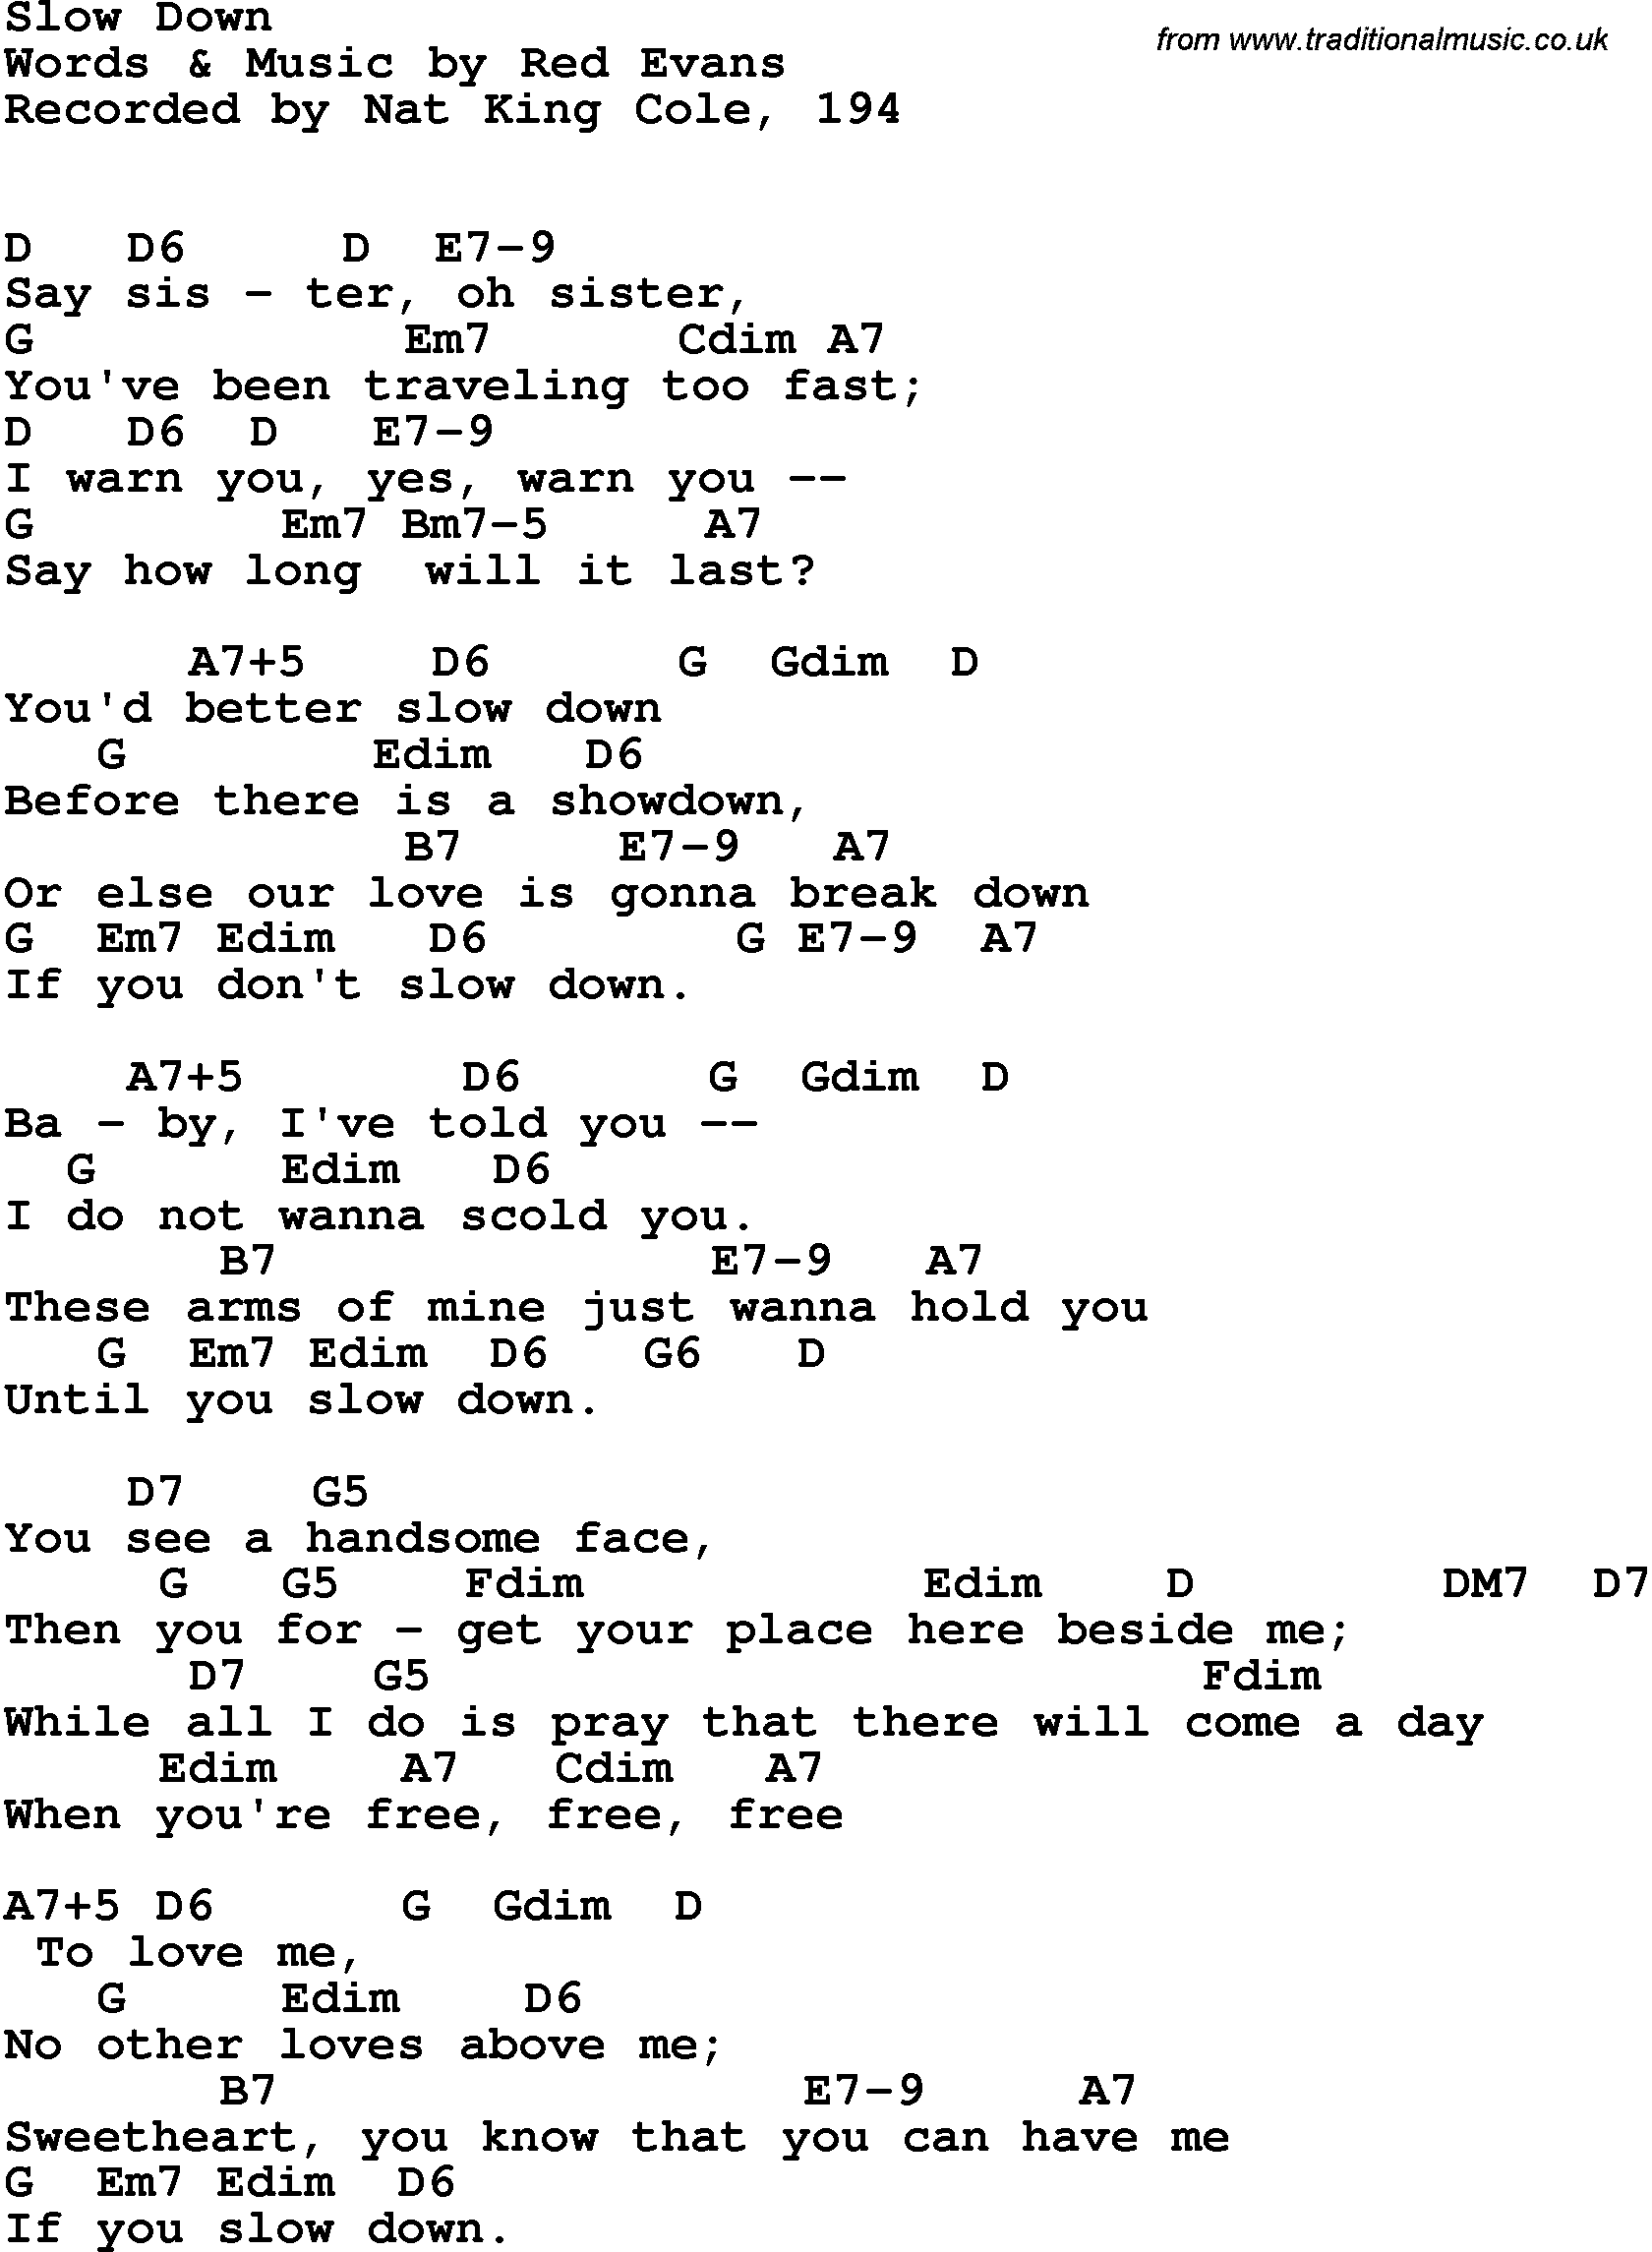 Song Lyrics with guitar chords for Slow Down - Nat King Cole, 1941